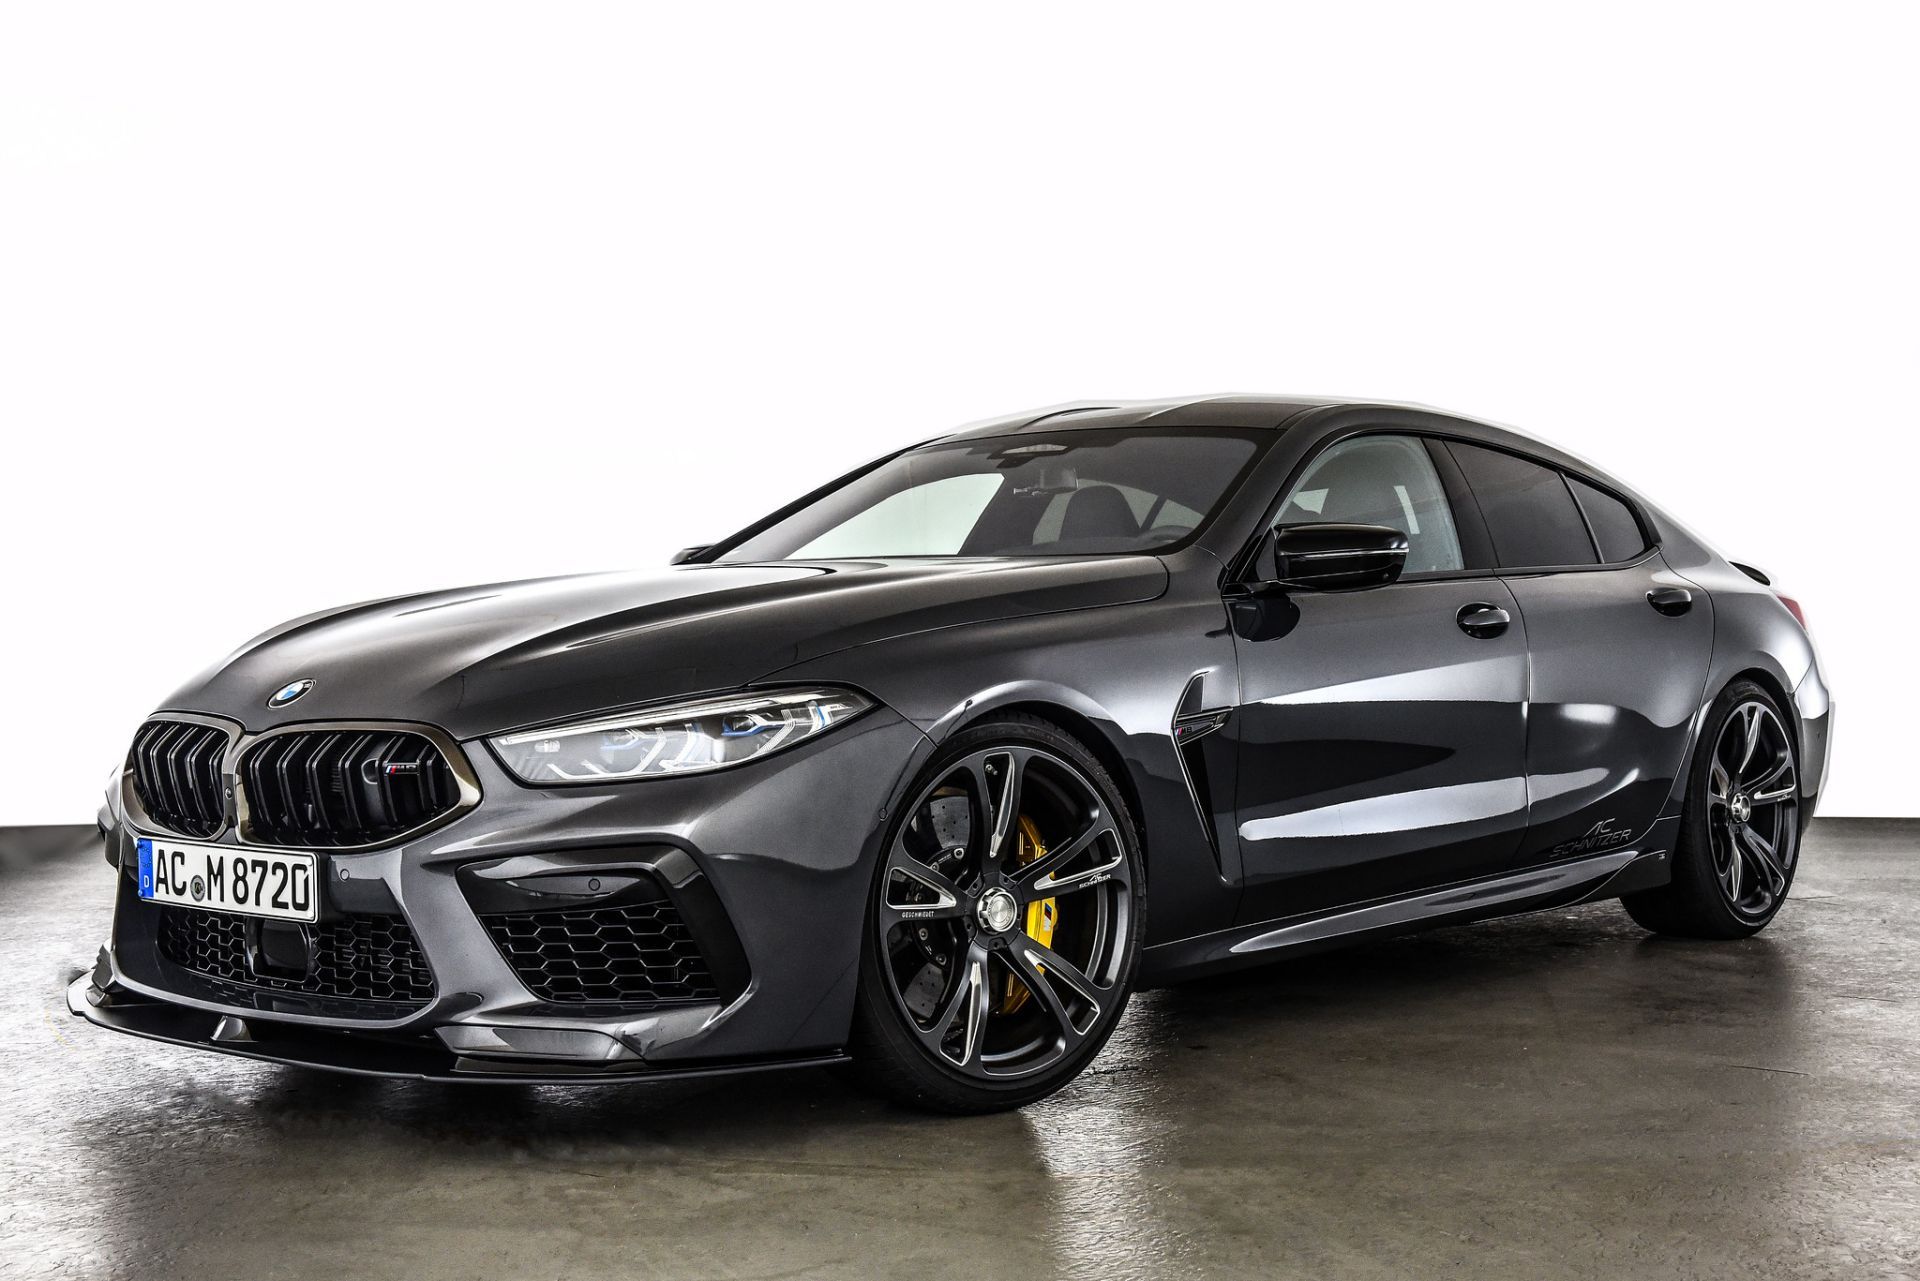 M 8 competition. BMW m8 Competition Gran Coupe. BMW m8 Competition Gran Coupe 2021. BMW m8 Competition Gran Coupe 2020 чёрная. BMW m8 Competition Gran Coupe f93.